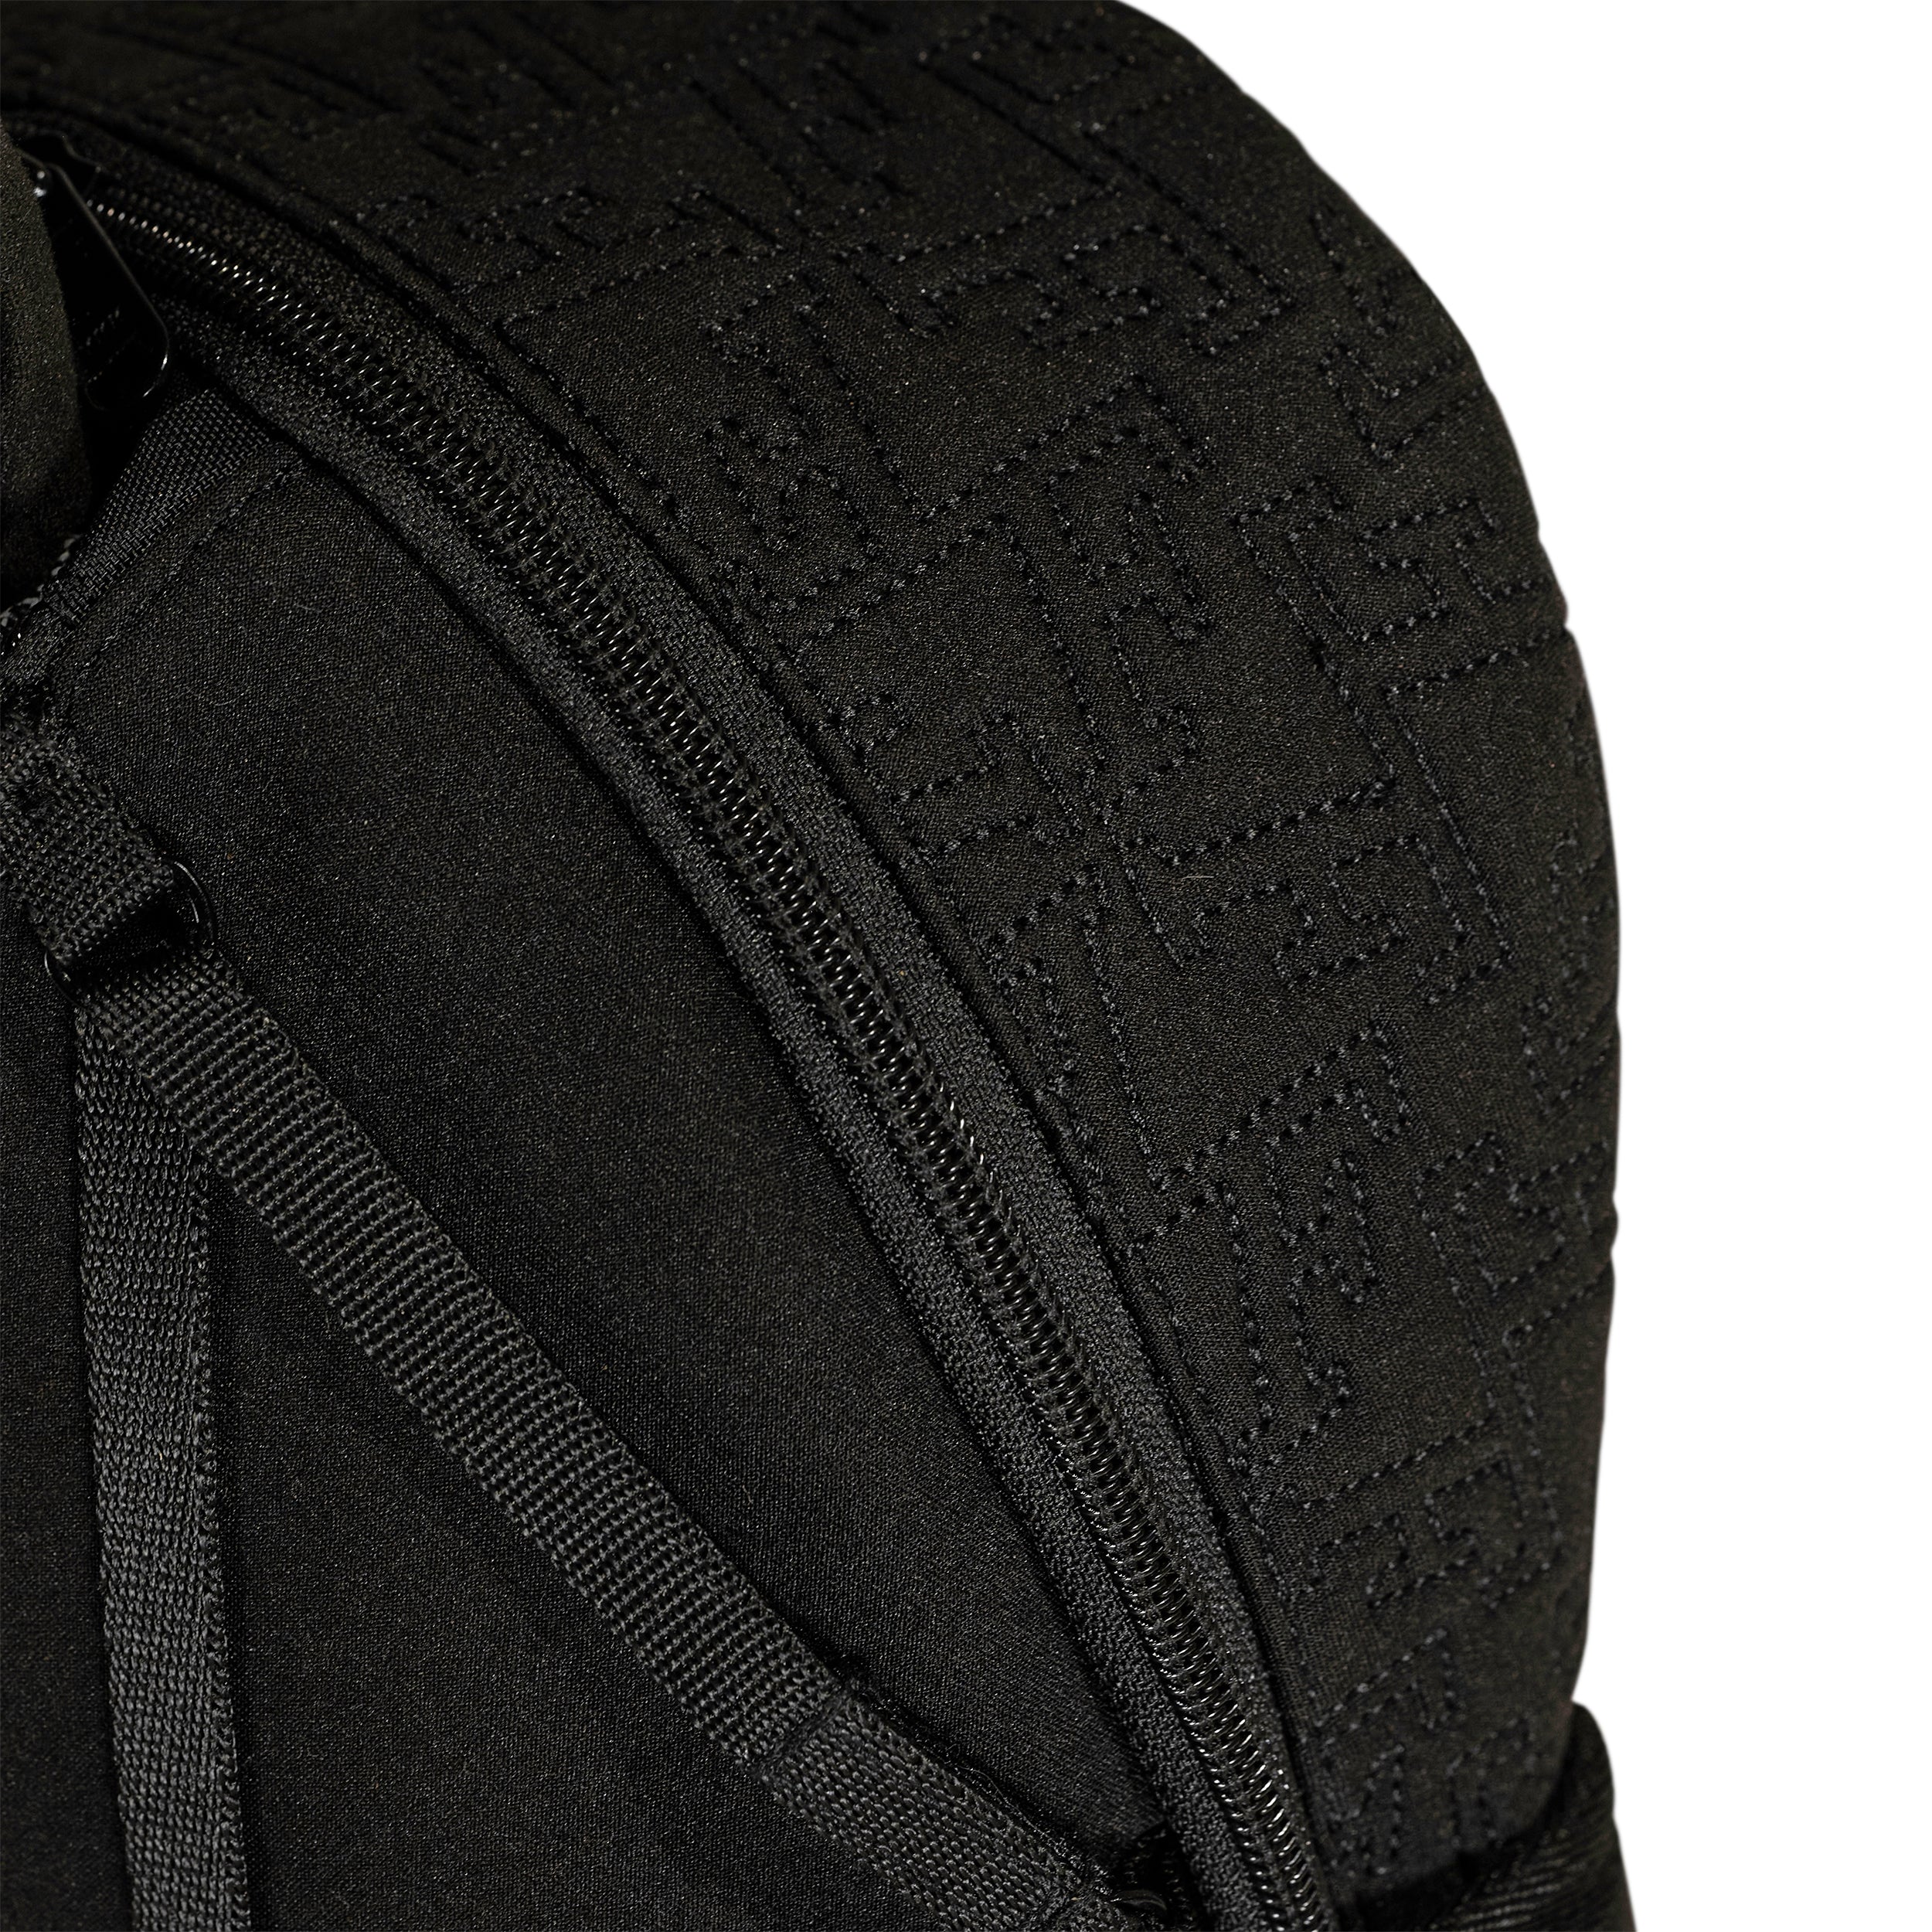 FRONT Queening The Pawn Backpack SB22 - BLACK - S